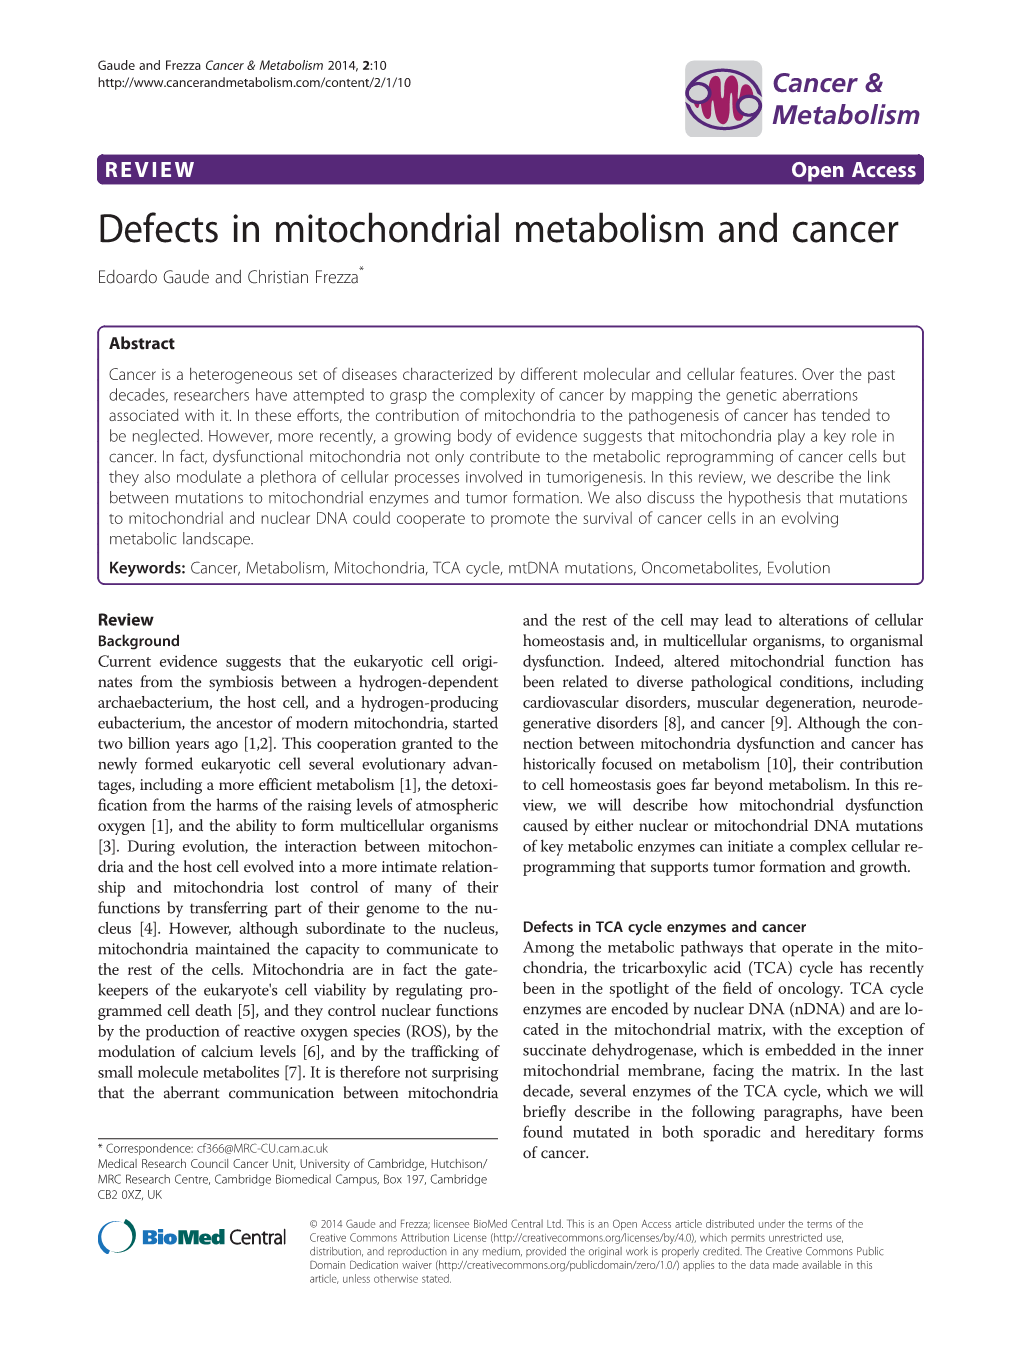 Defects in Mitochondrial Metabolism and Cancer Edoardo Gaude and Christian Frezza*